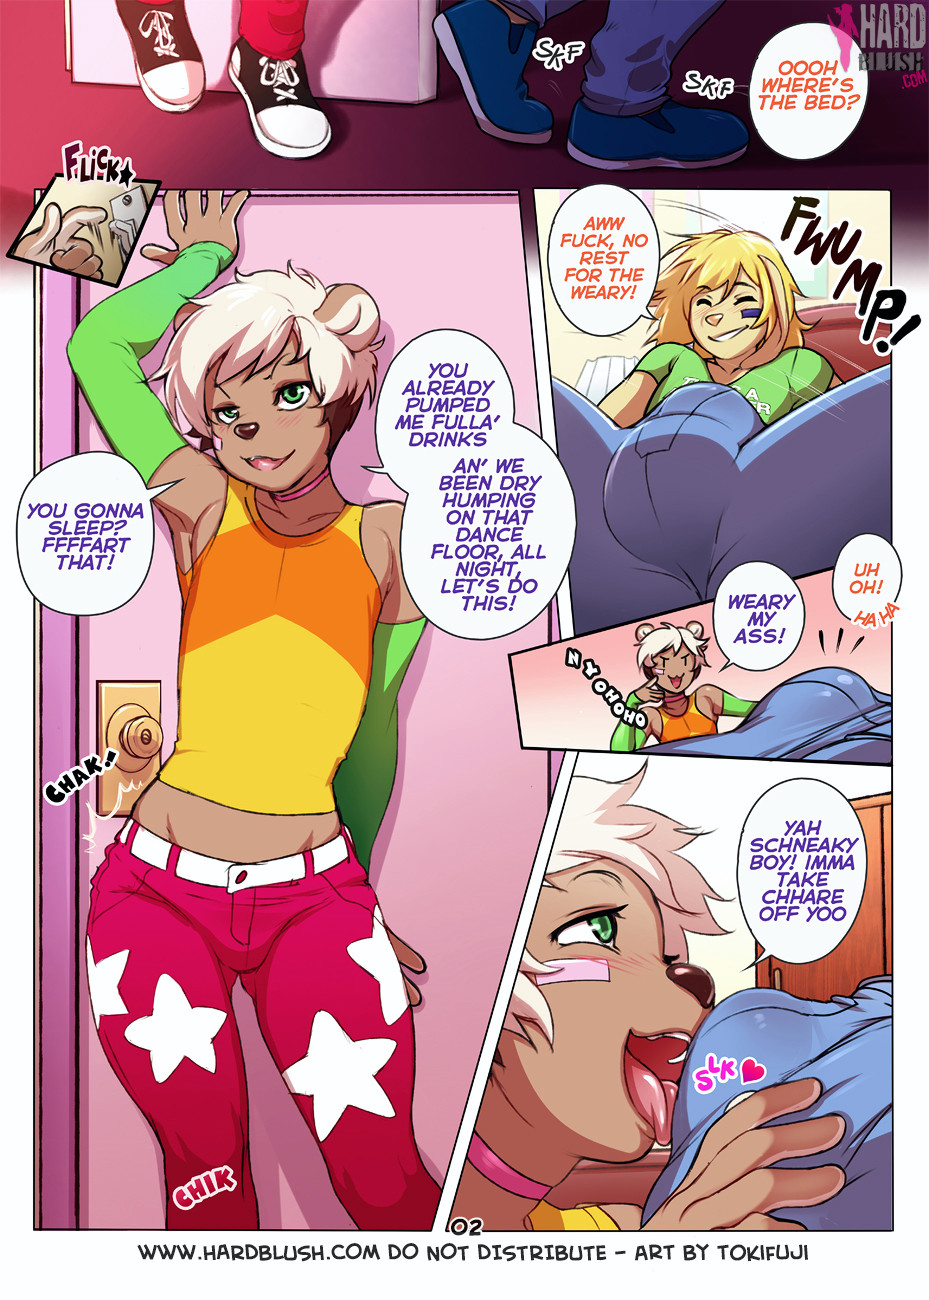 Furry Porn Party - gay furry comic â€“ The Drunken After Party